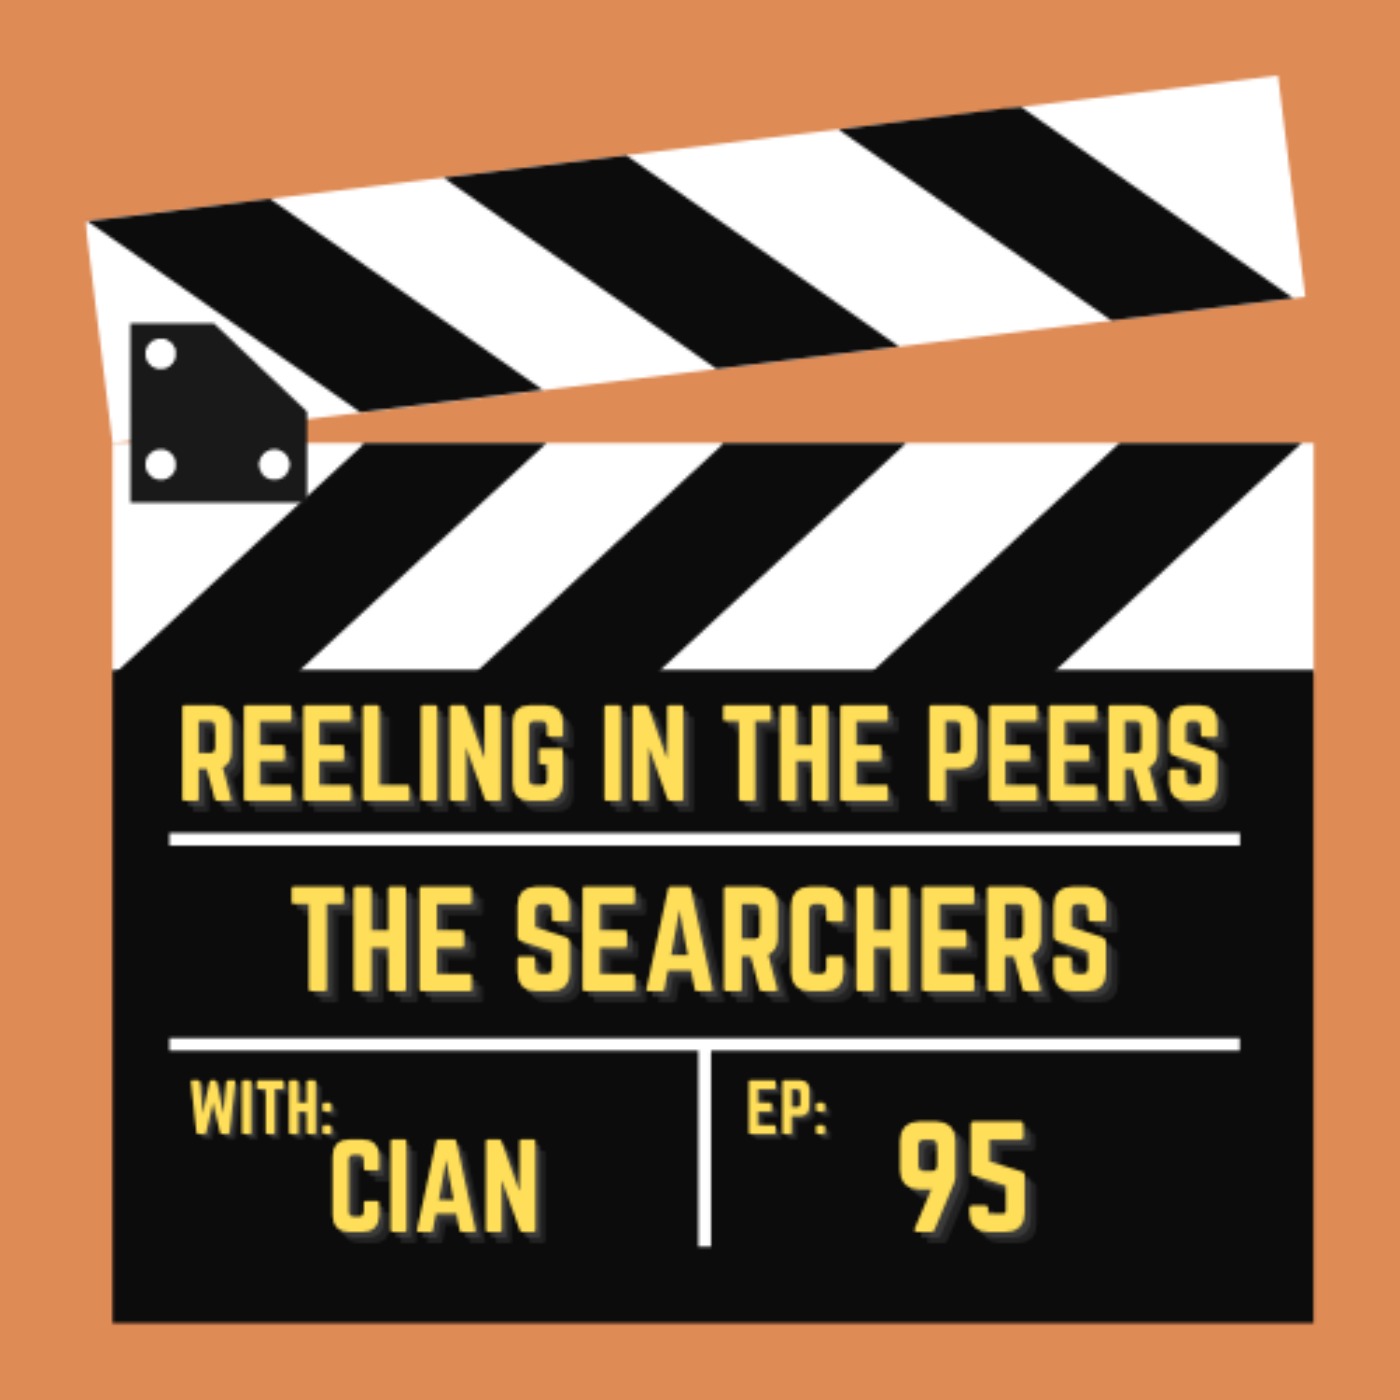 95 The Searchers - Classics with Cian